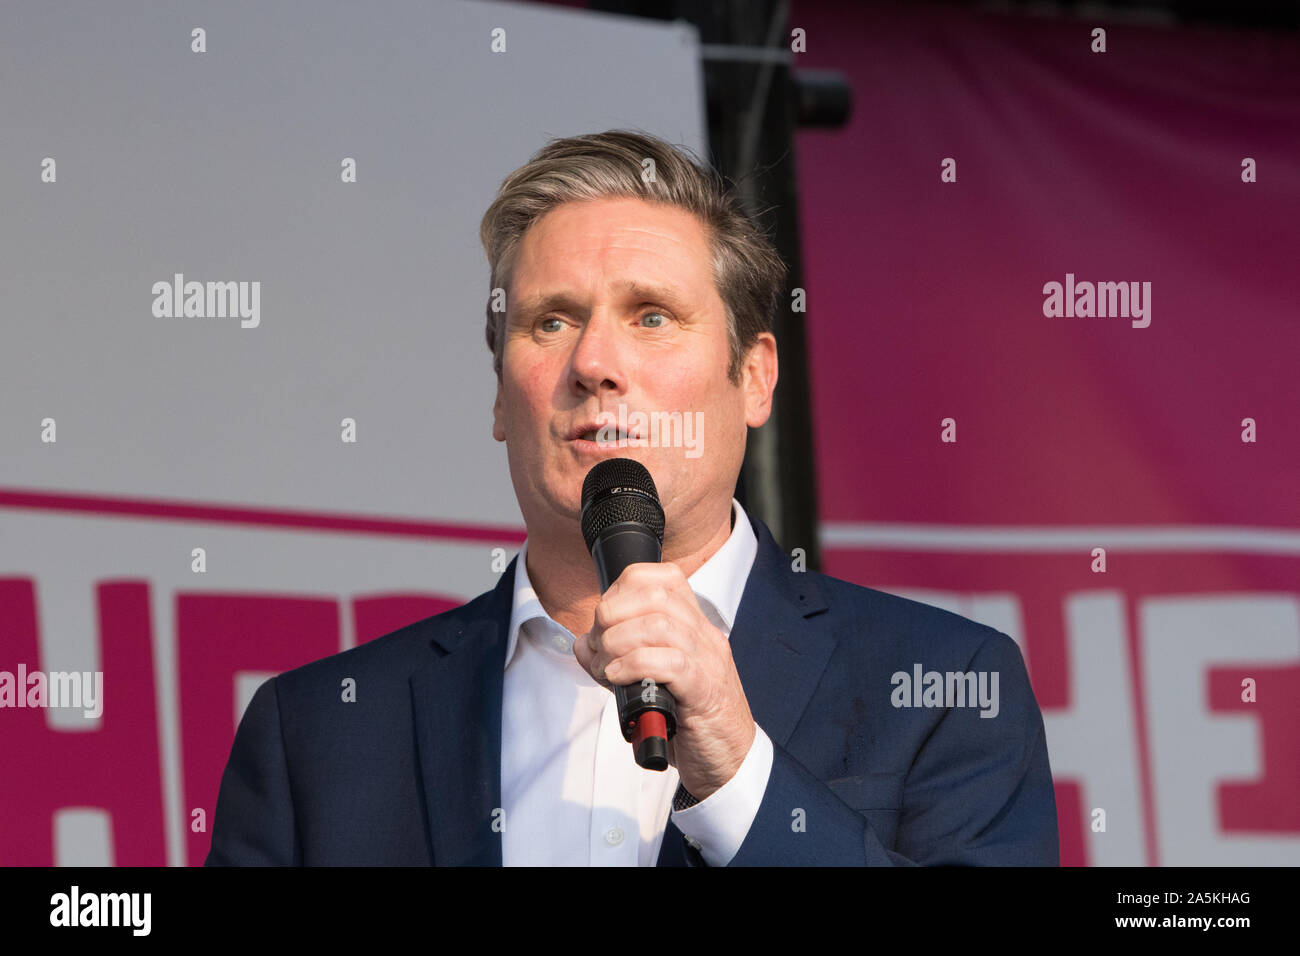 Westminster, London, UK. 19 October 2019. Sir Keir Starmer MP addresses the crowd at Parliament Square. MPs have just voted in favour of Oliver Letwin MP amendment to the government’s Brexit Deal. Hundreds of thousands supporters of the 'People's Vote' converge on Westminster for a ‘final say’ on the Prime Minister Boris Johnson’s new Brexit deal. Stock Photo